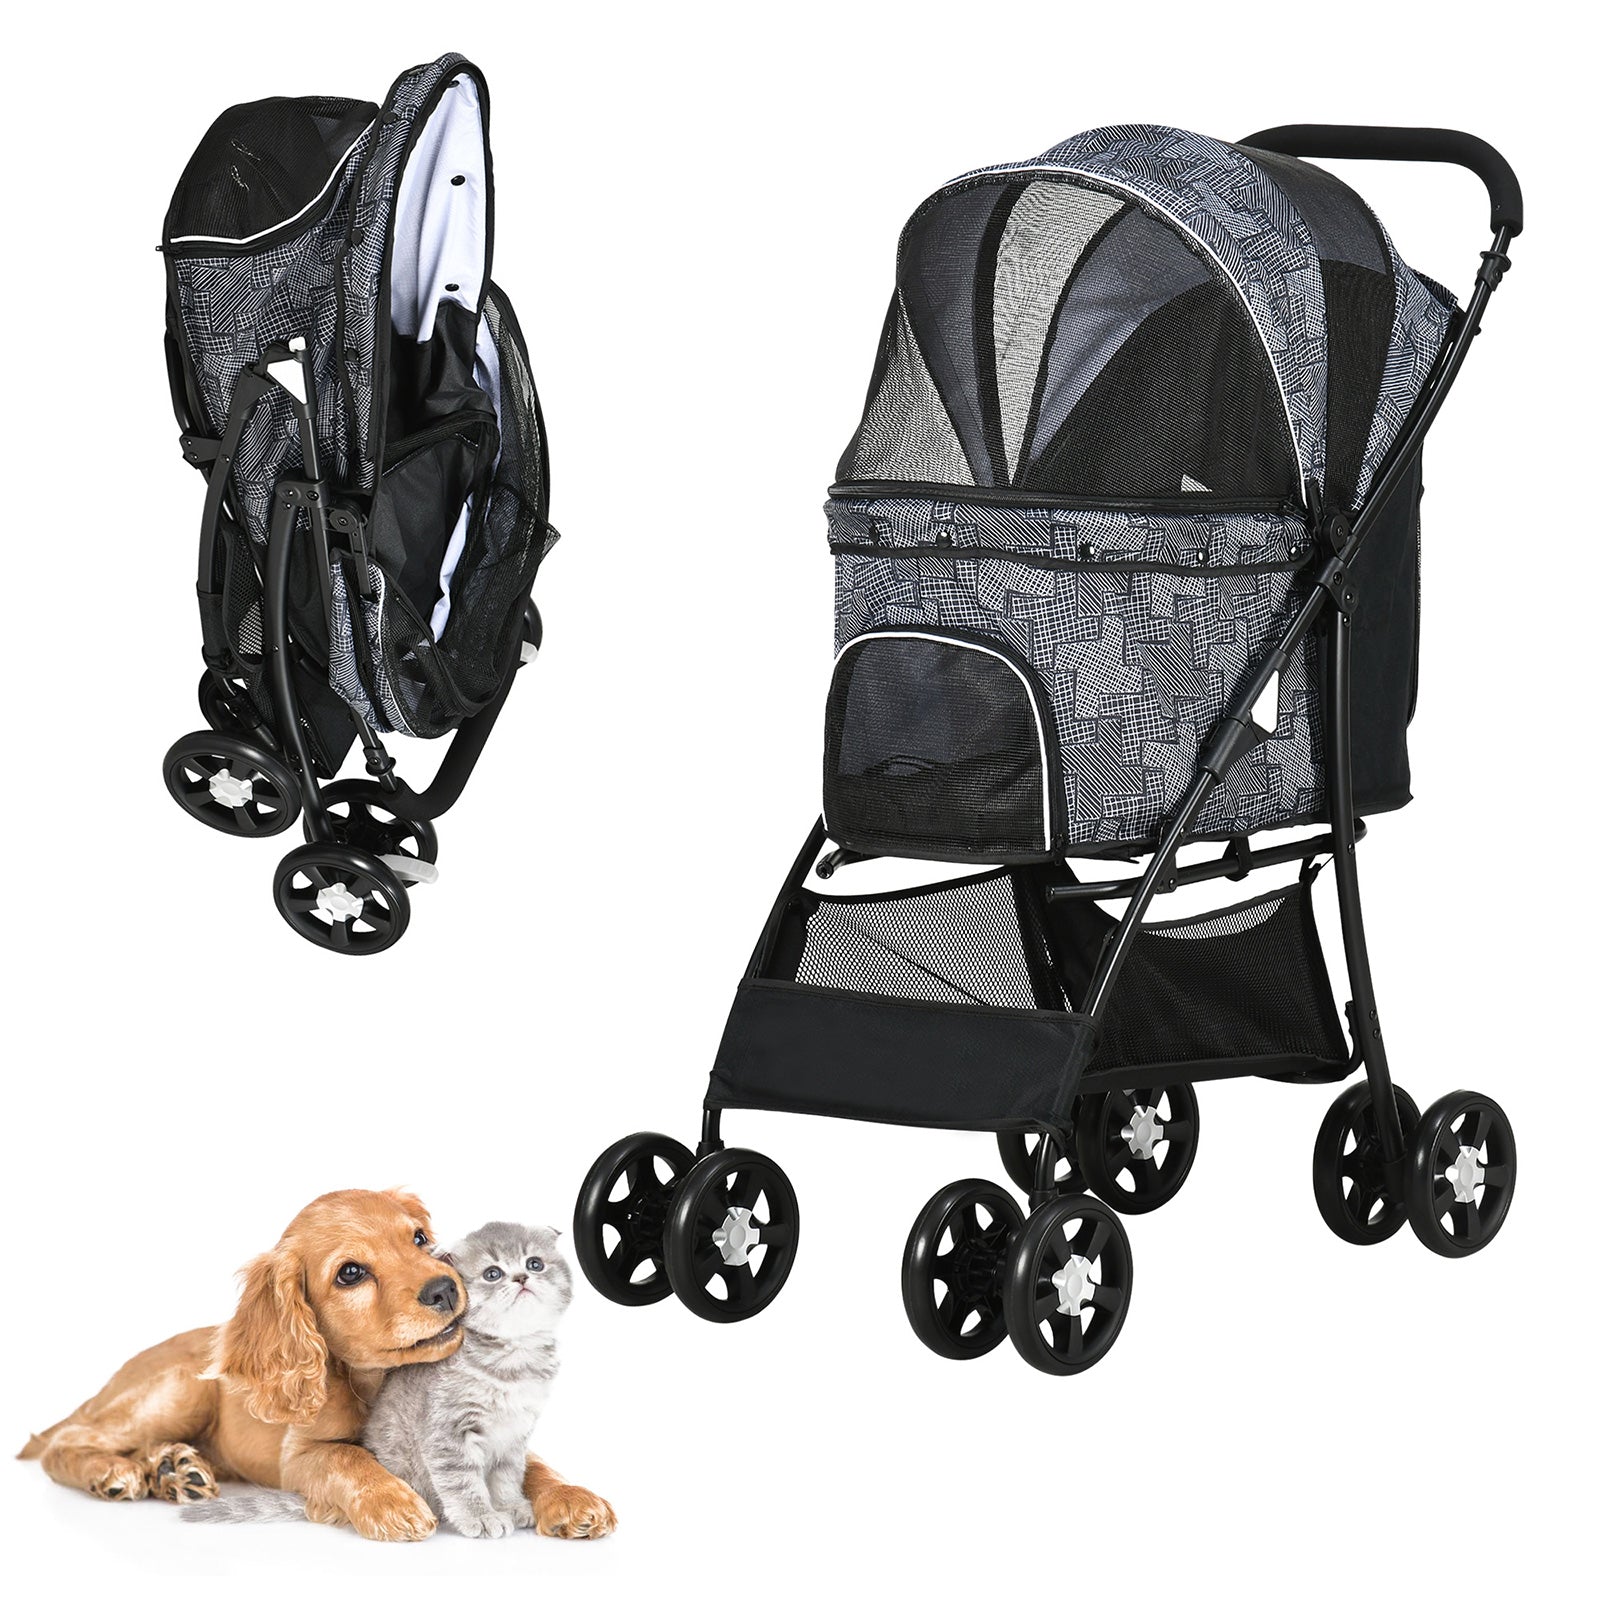 Lightweight Foldable Travel Carriage Pet Stroller with Storage Basket Breathable Mesh, Black